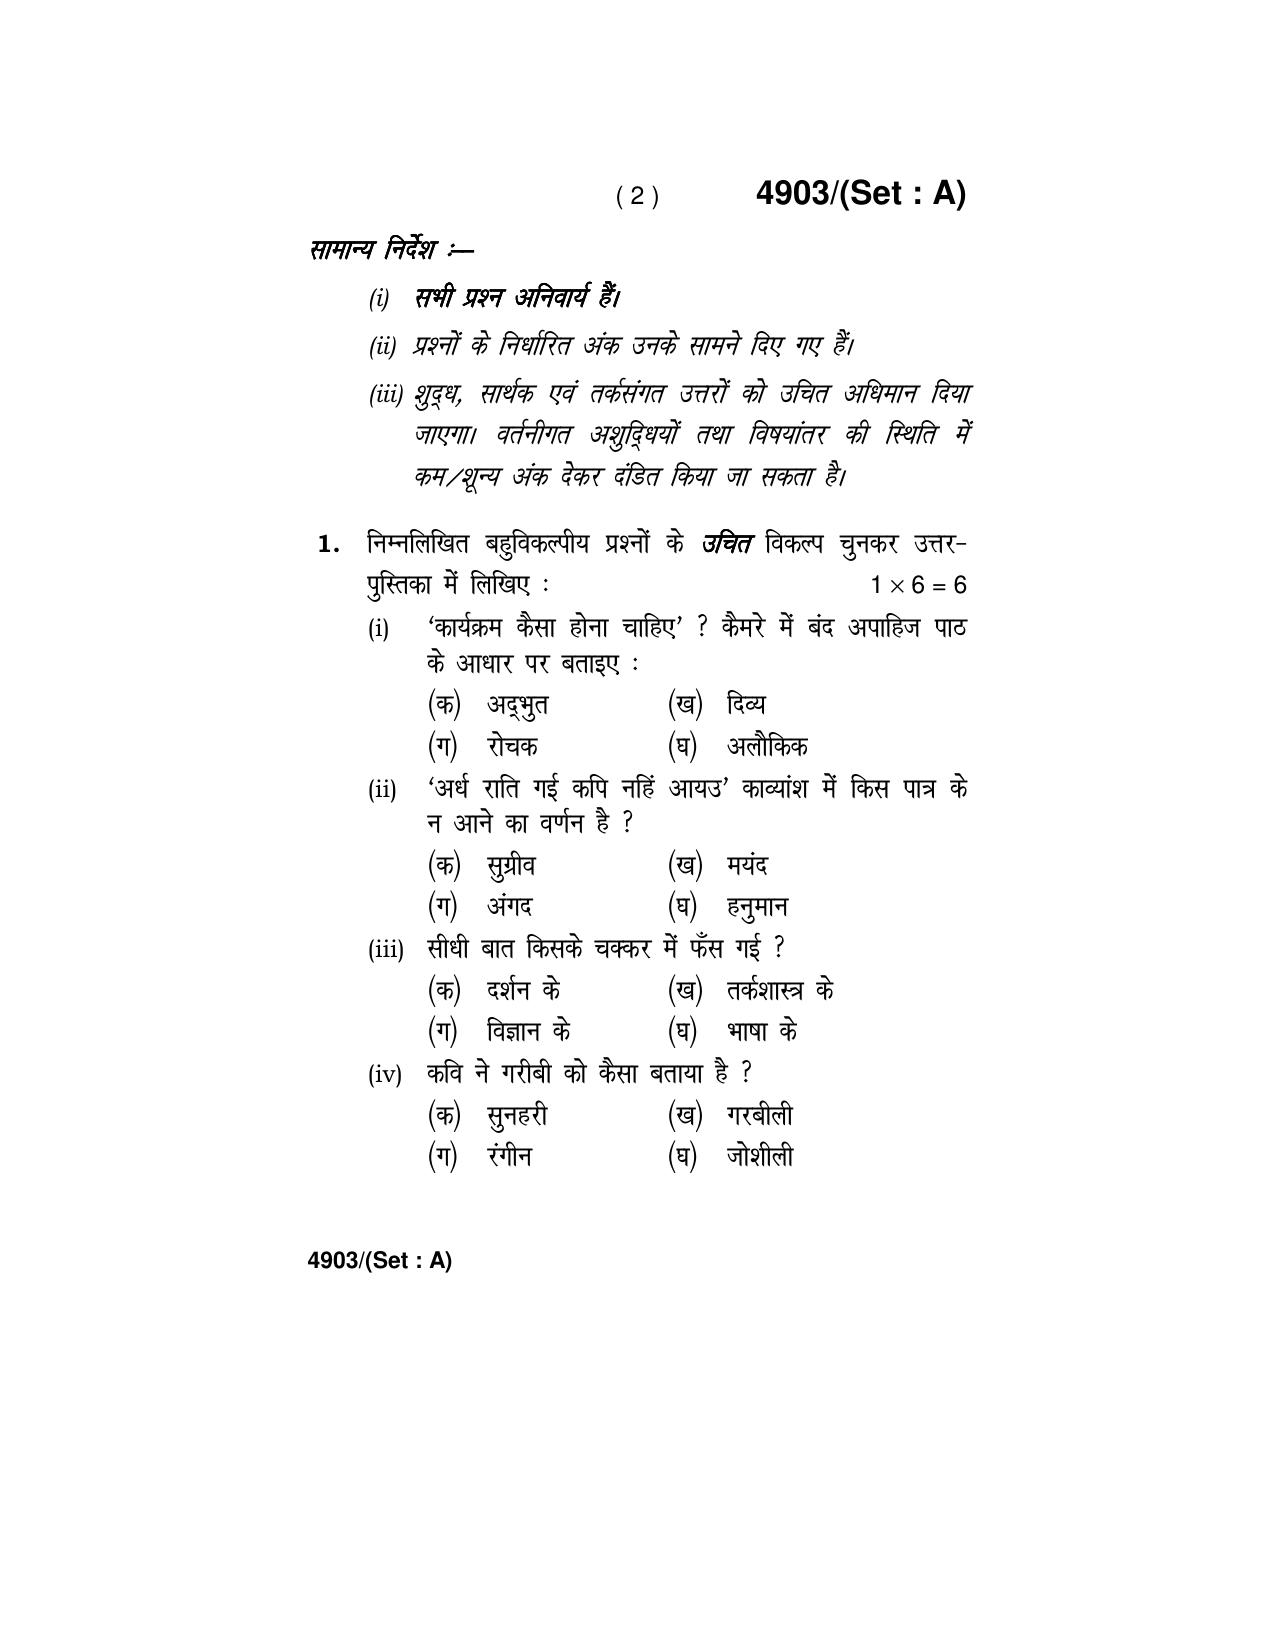 Haryana Board HBSE Class 12 Hindi Core 2020 Question Paper - Page 2